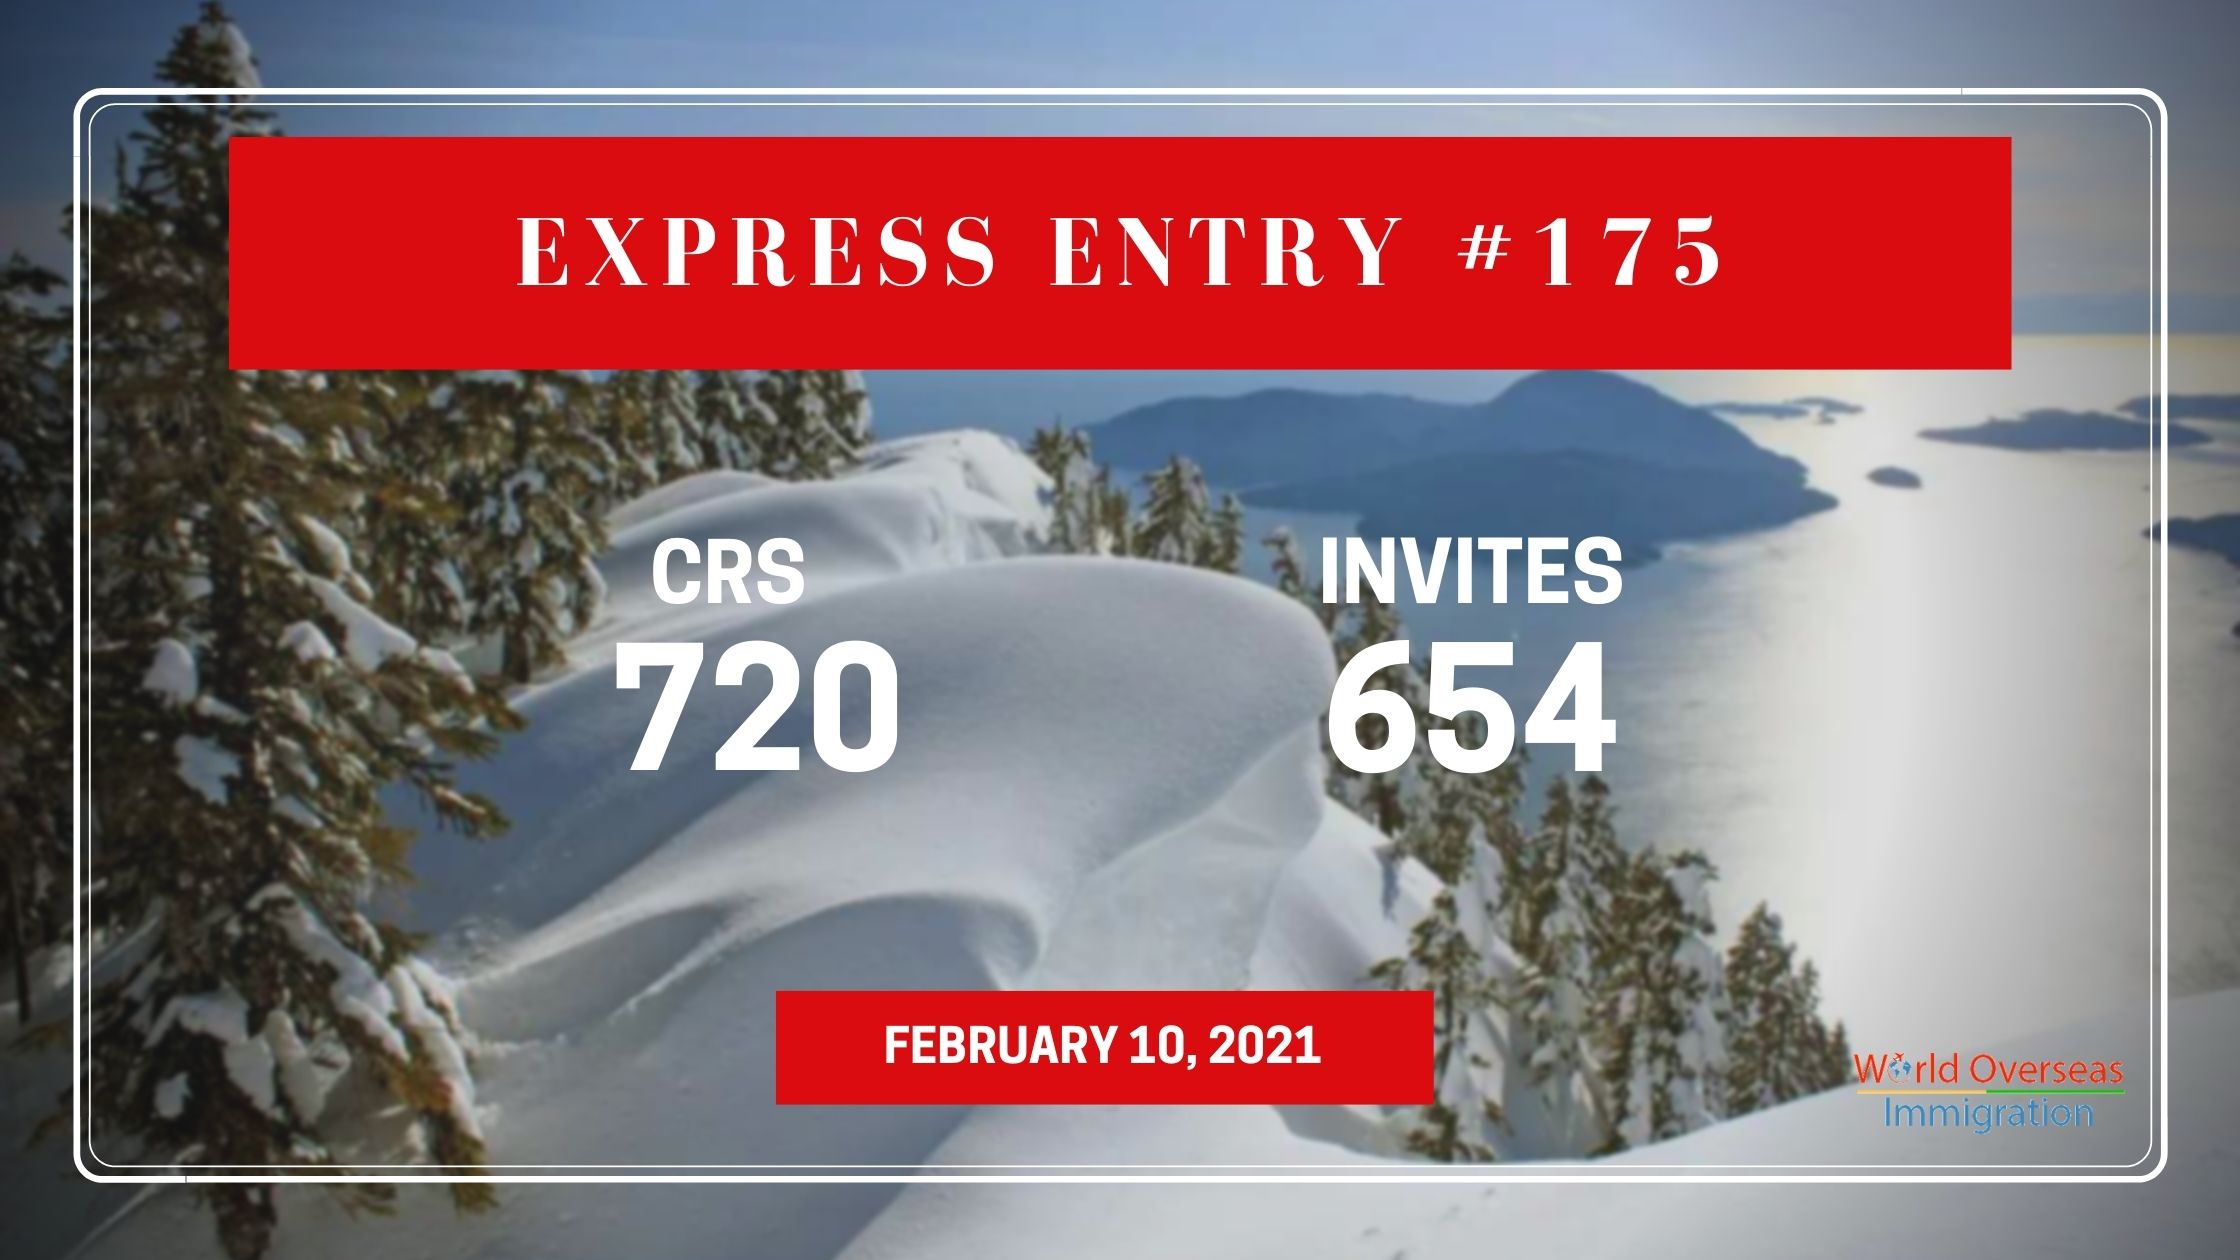 Express Entry #175: 654 ITAs are issued in the new draw